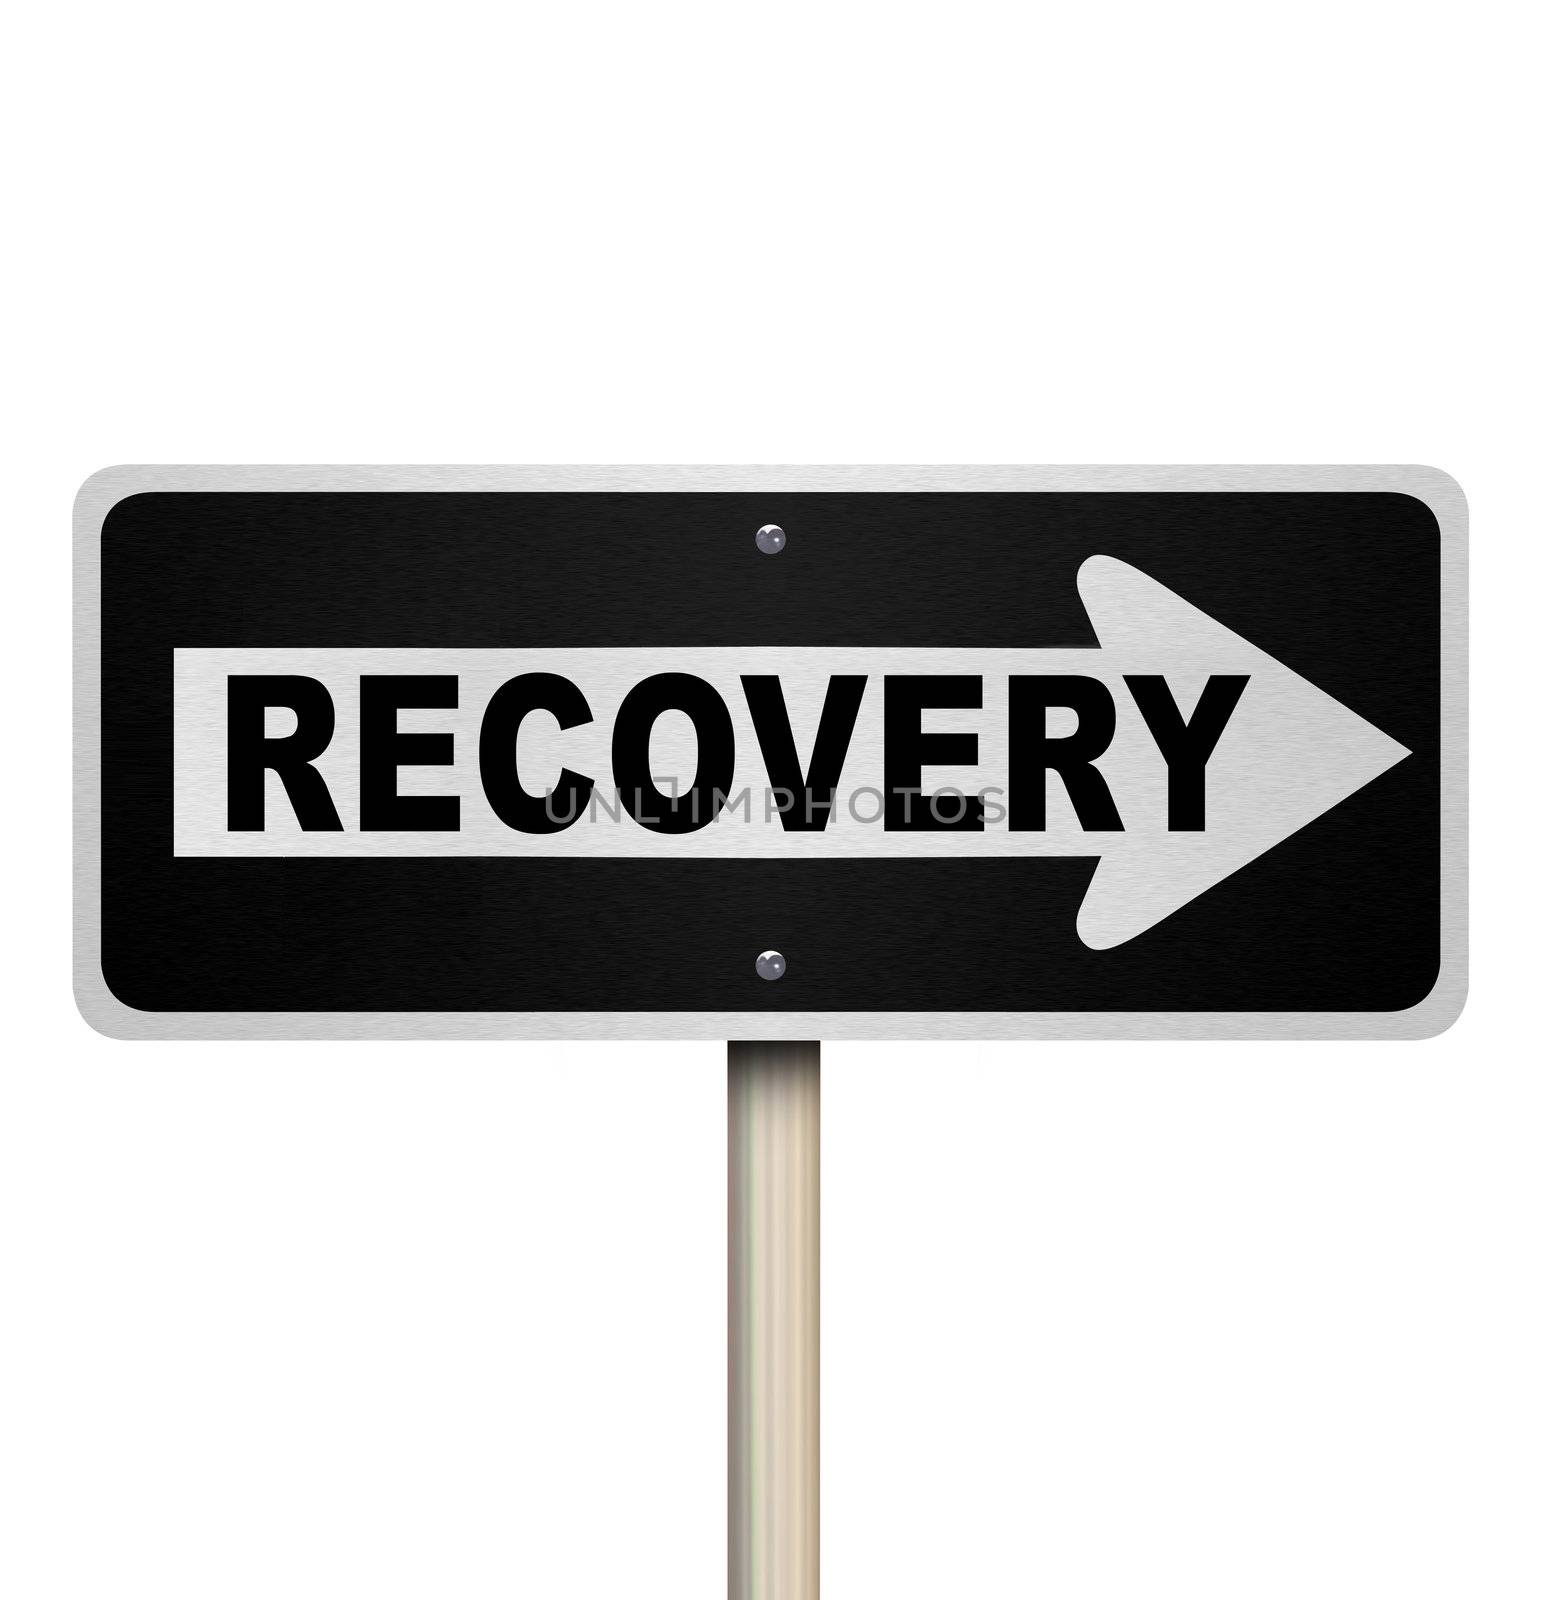 The word Recovery on a one-way arrow street or road sign pointing to improvement, growth, rejuvenation, increase or getting better in health, work, economy or life